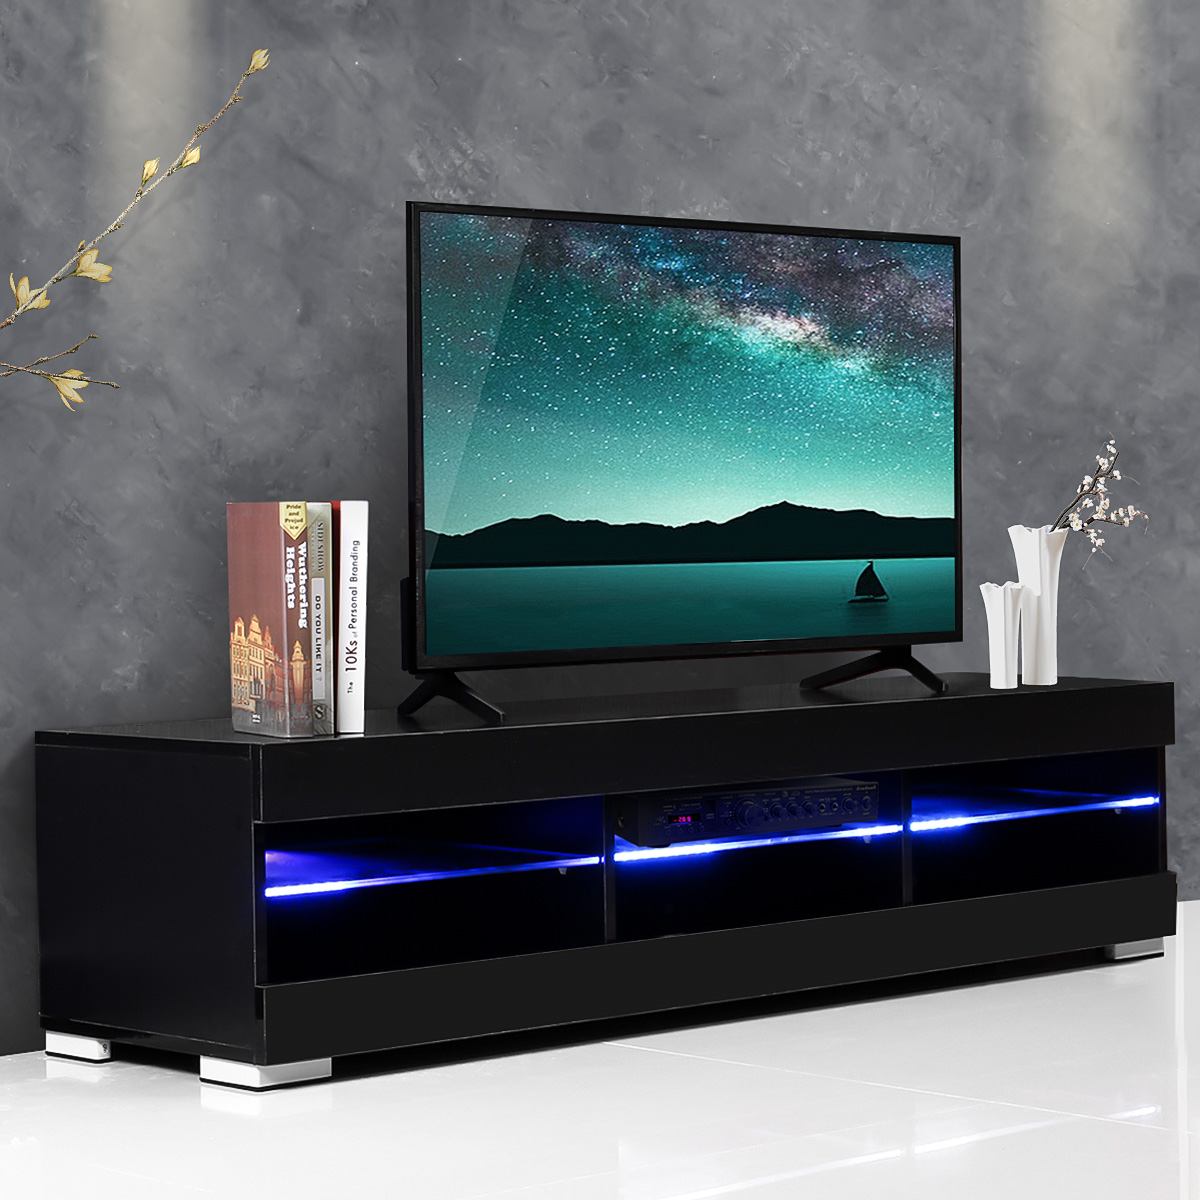 57 inch RGB LED TV Unit Cabinet Stands with 6 Open Drawers TV Bracket Table Home Living Room Furniture tv Stands high gloss